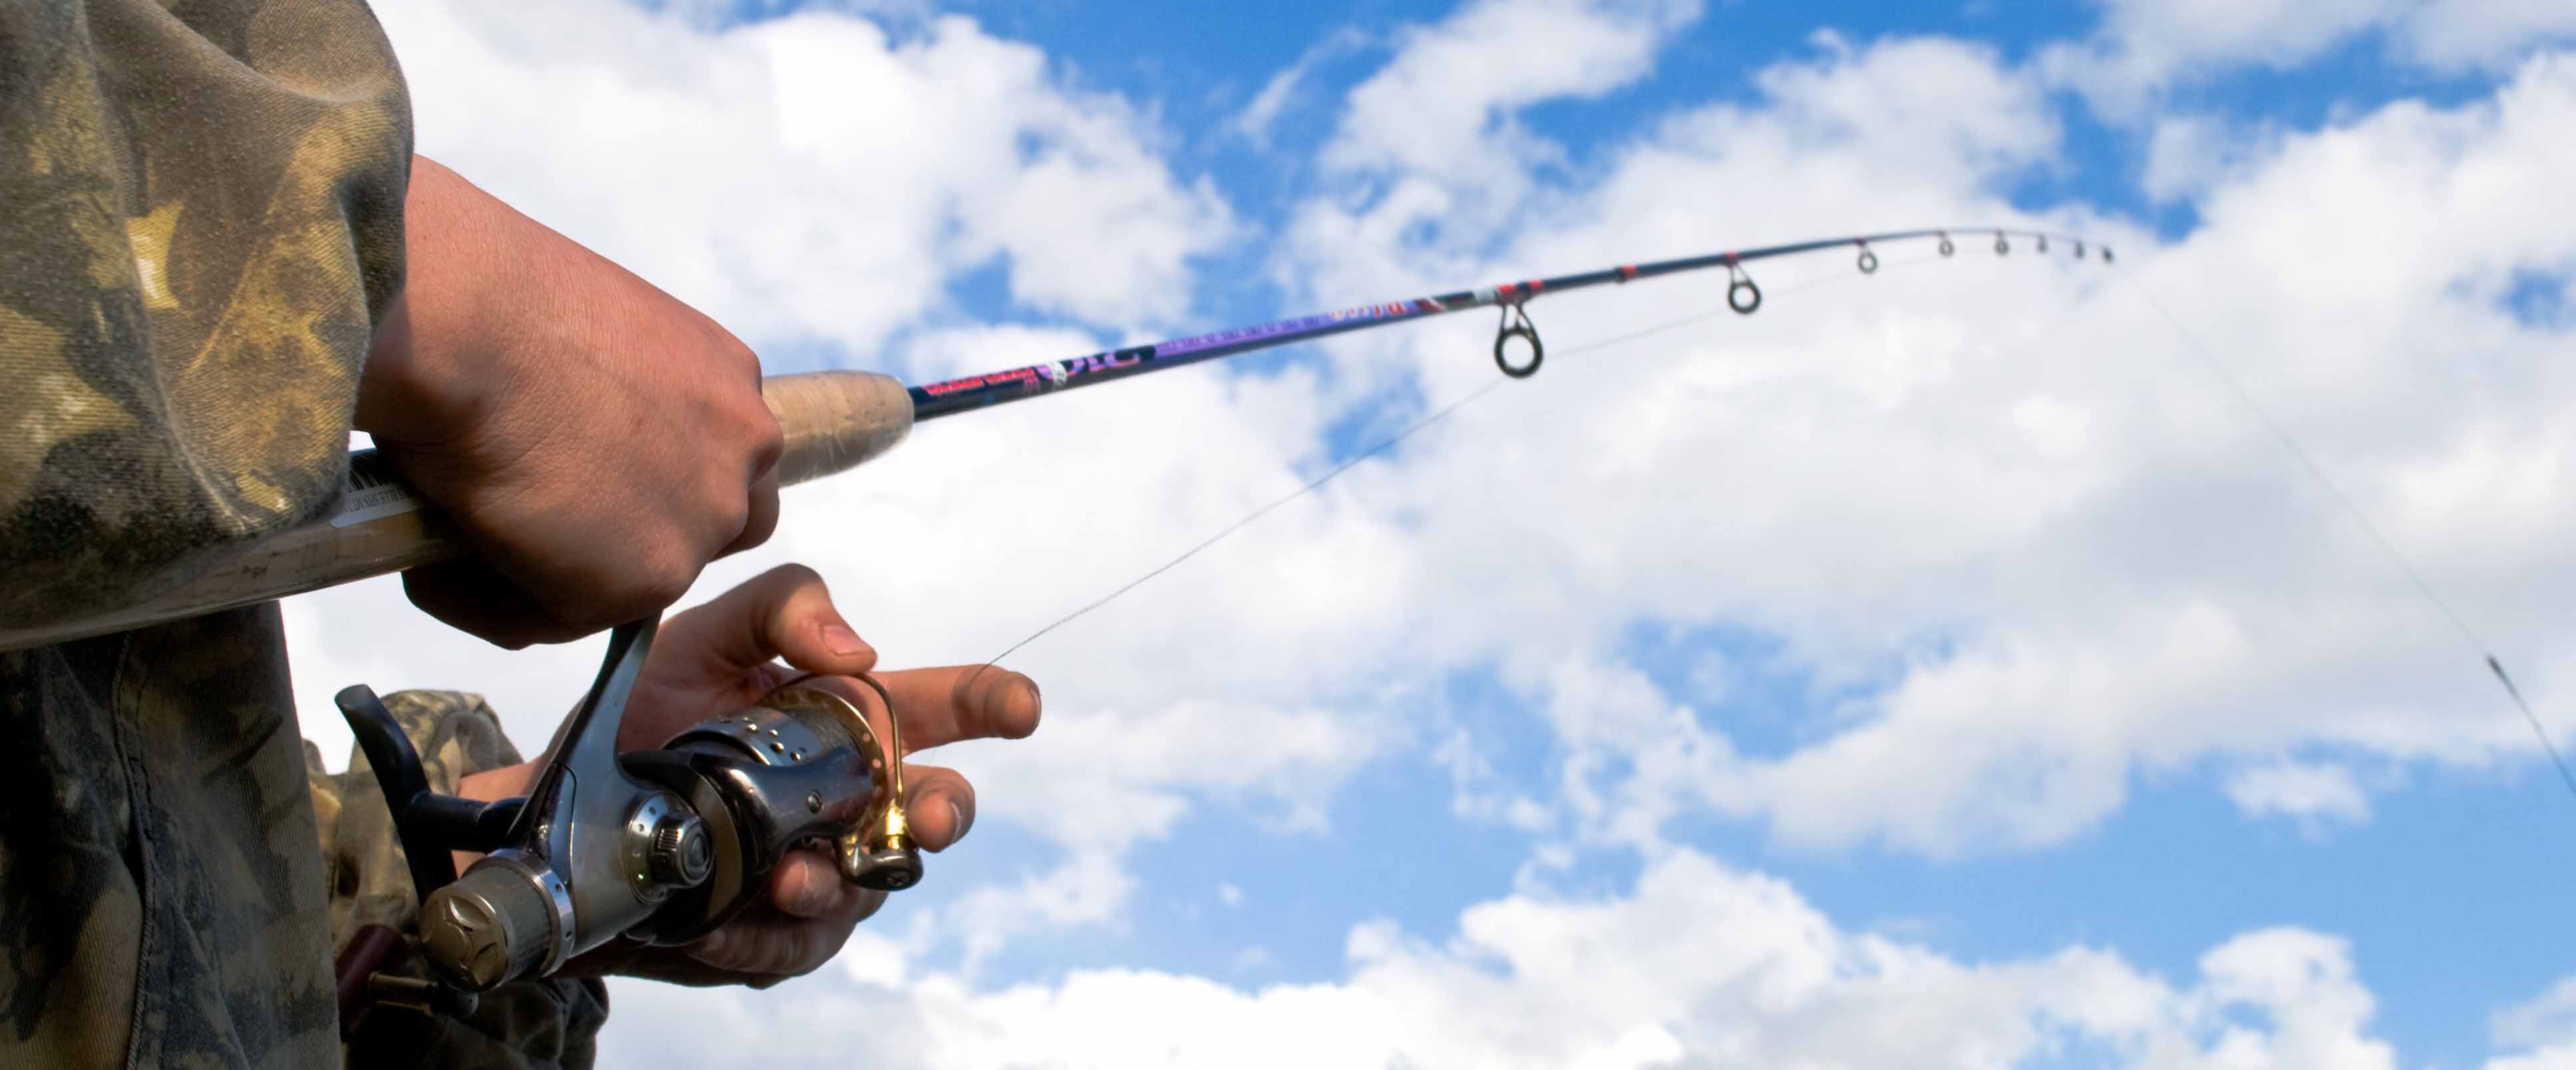 Spinning reels are some of the most-basic fishing tools for both inshore  and offshore anglers